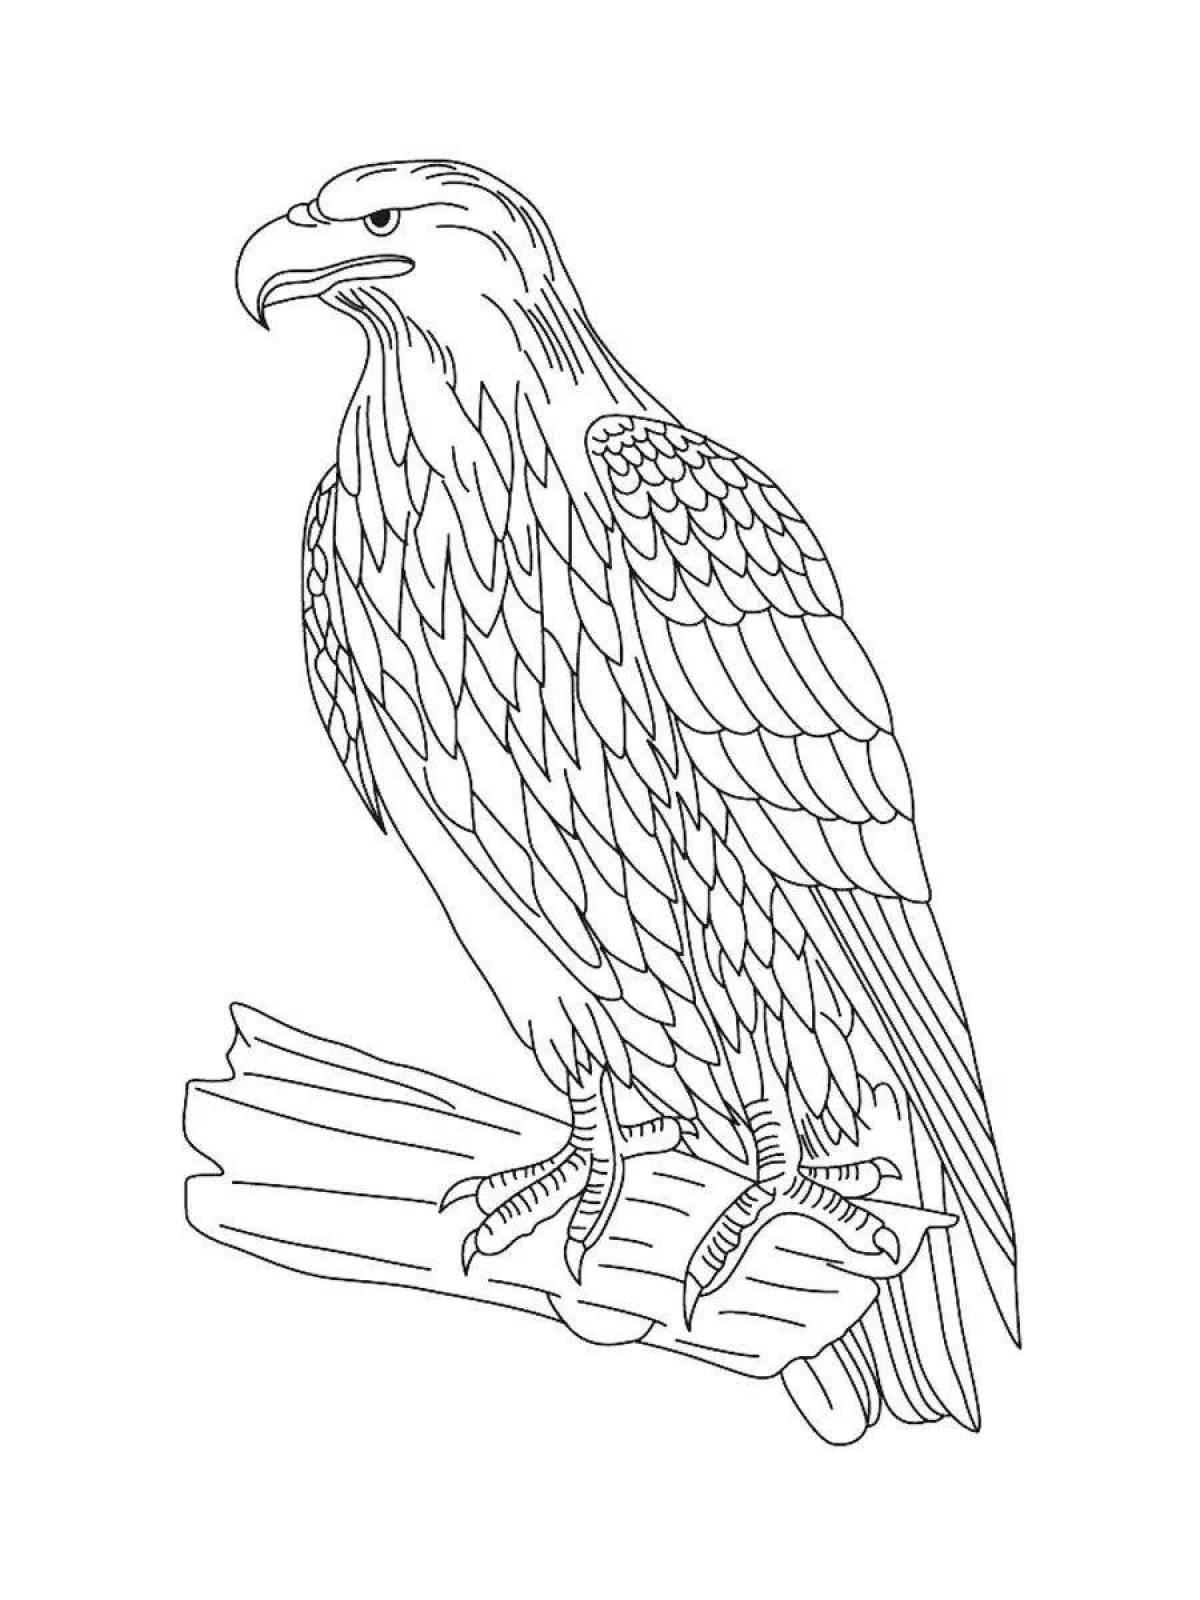 Glowing eagle coloring page